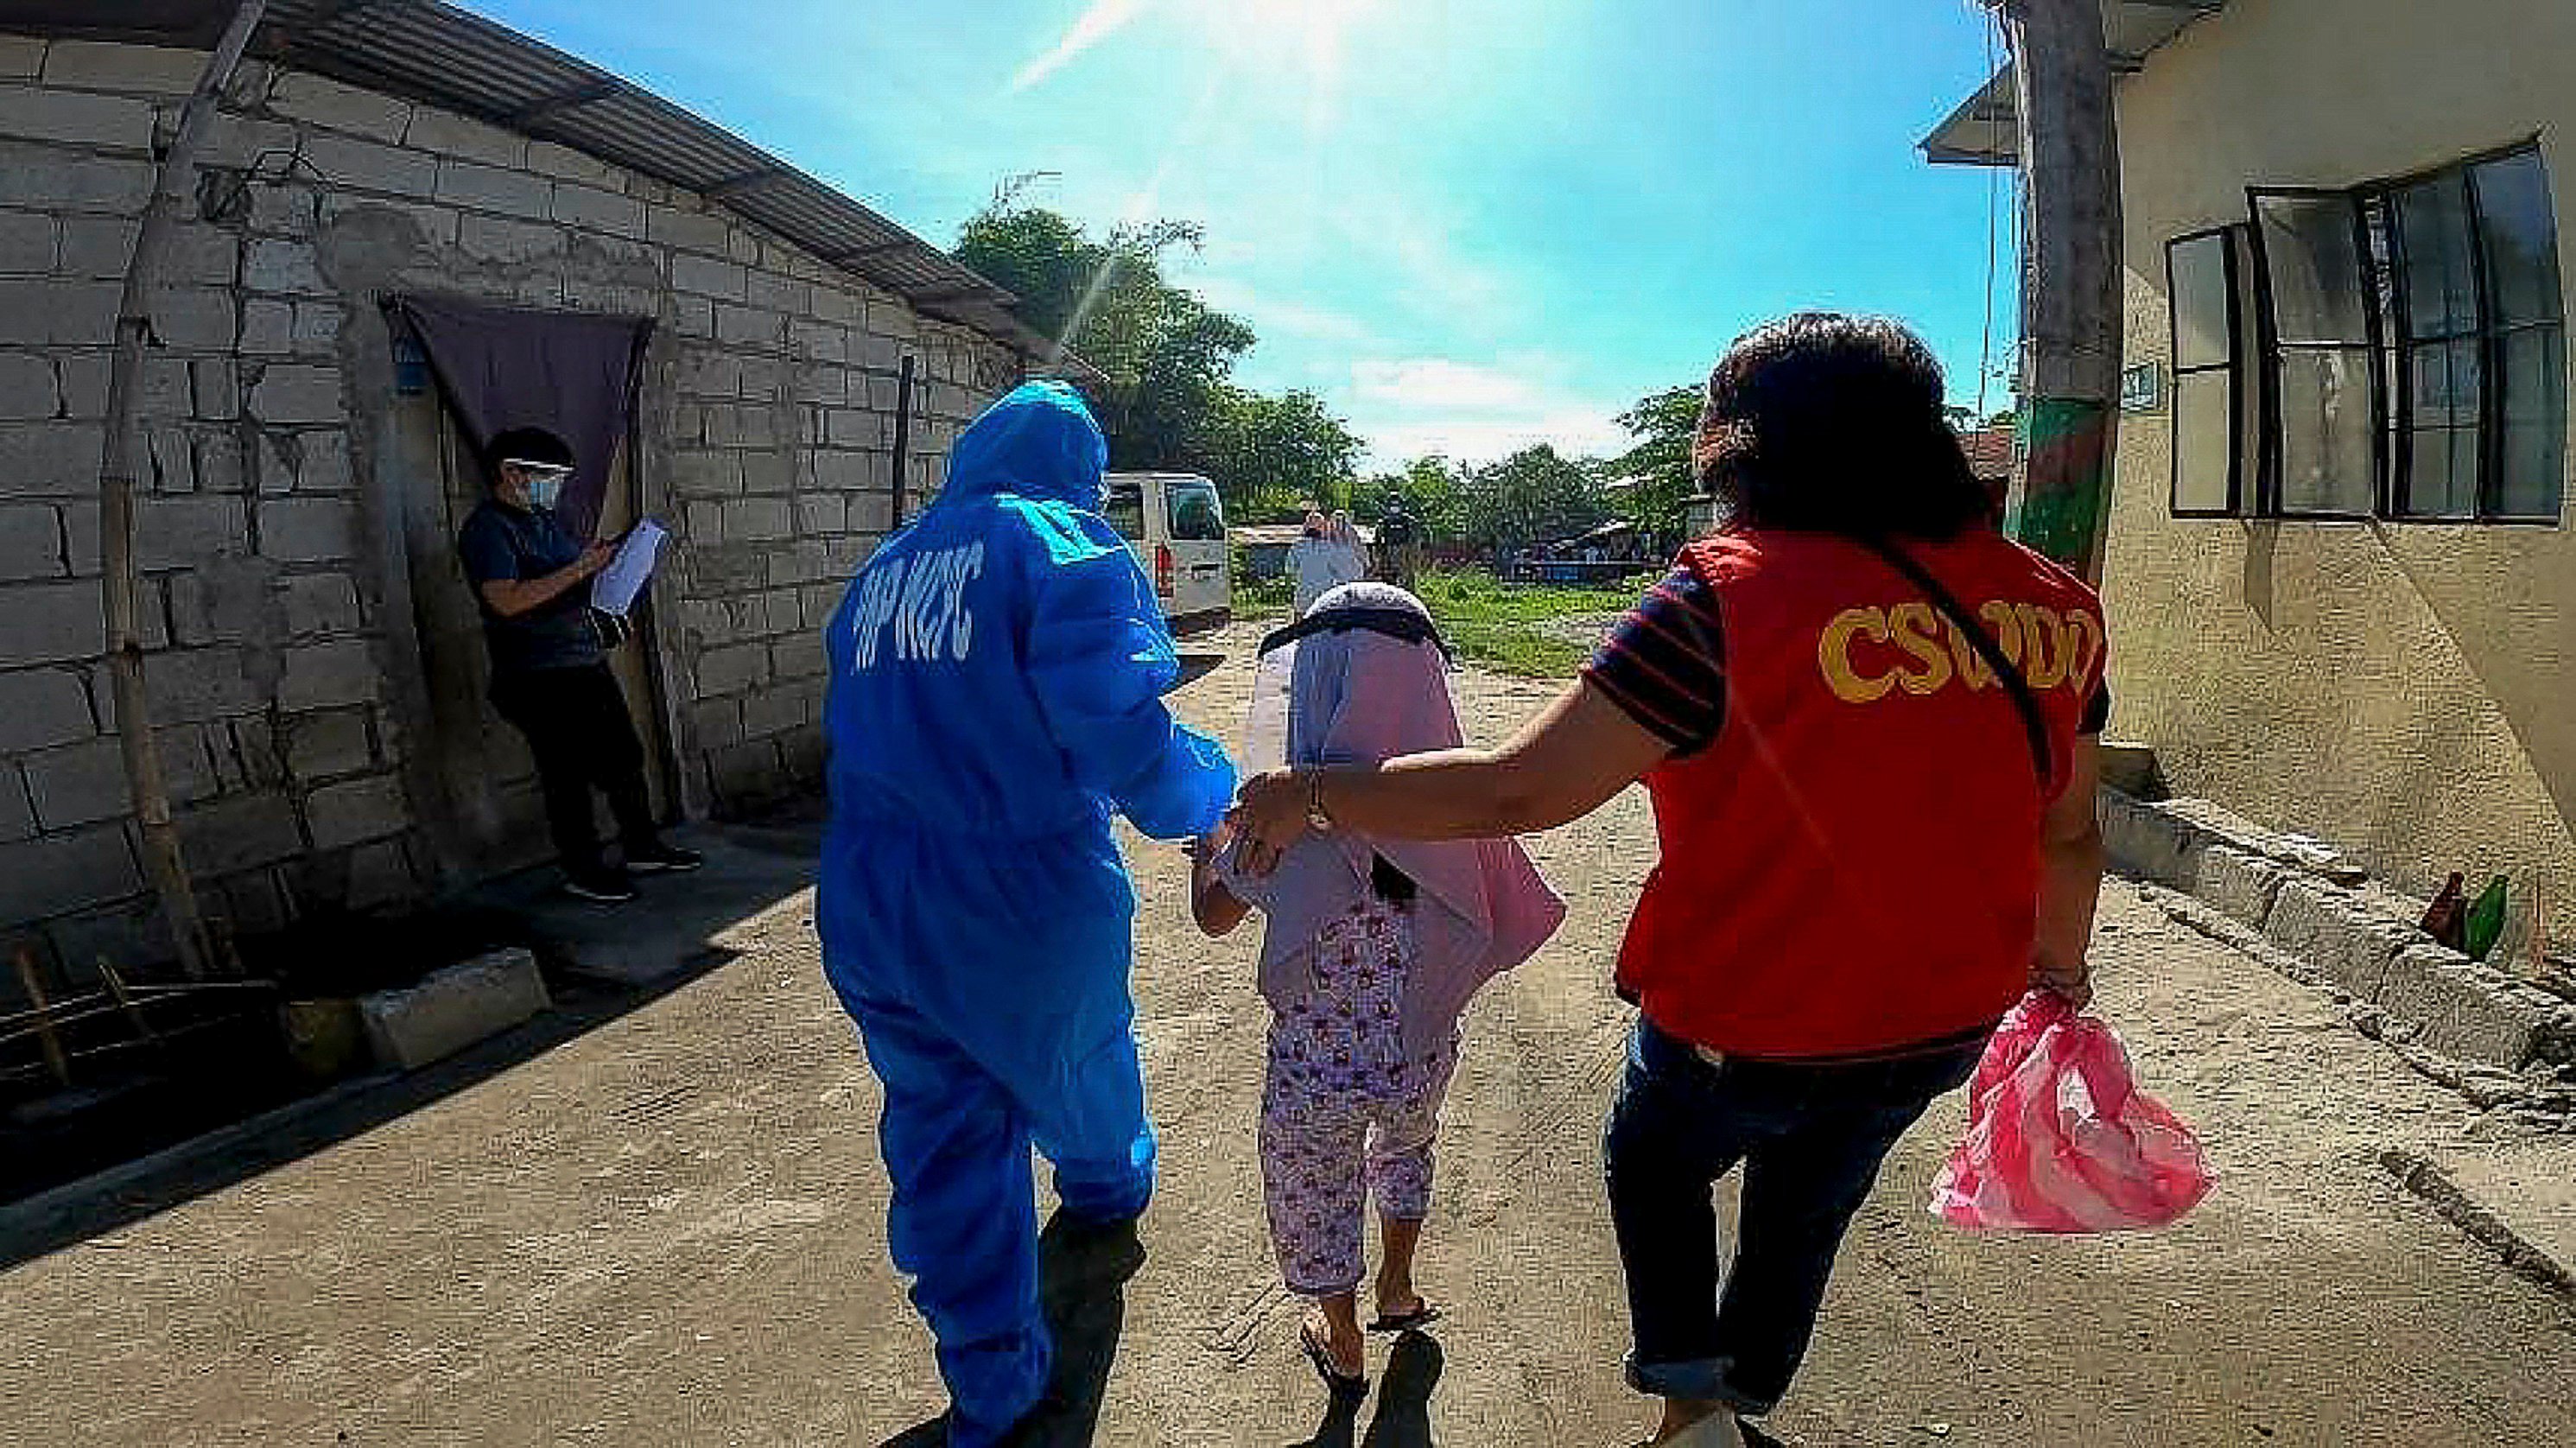 A child suspected to have been abused online is rescued in an operation in Angeles City, the Philippines, in February 2021. Nine children were rescued and one woman arrested. Photo: Red Door News/Australian Federal Police